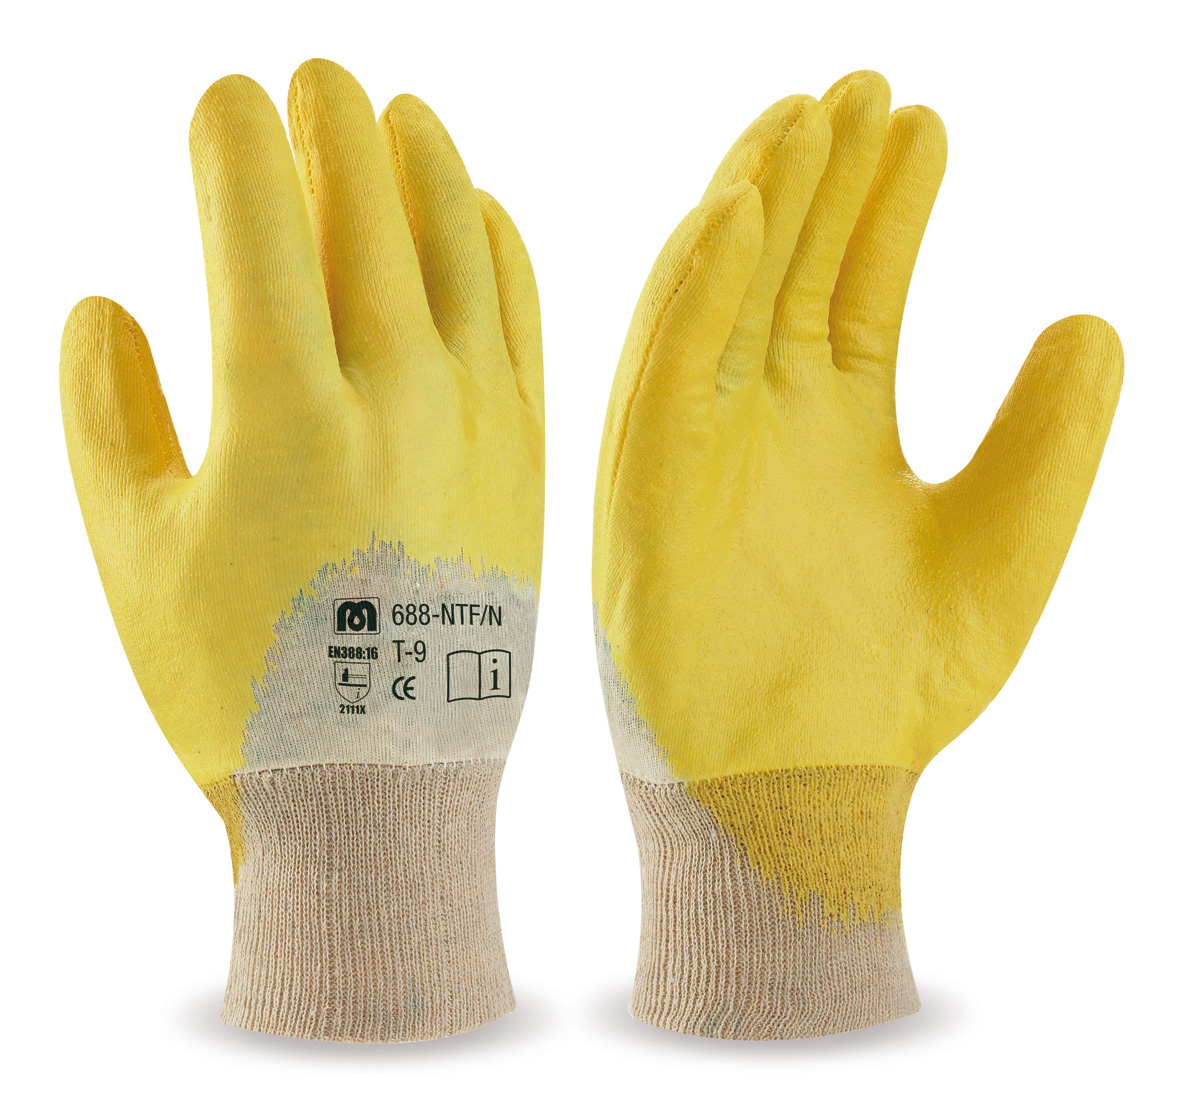 688-NC Work Gloves Nitrile With Support  Covered back. Flexible Nitrile Glove with cotton support, rigid sleeve and inner lining.